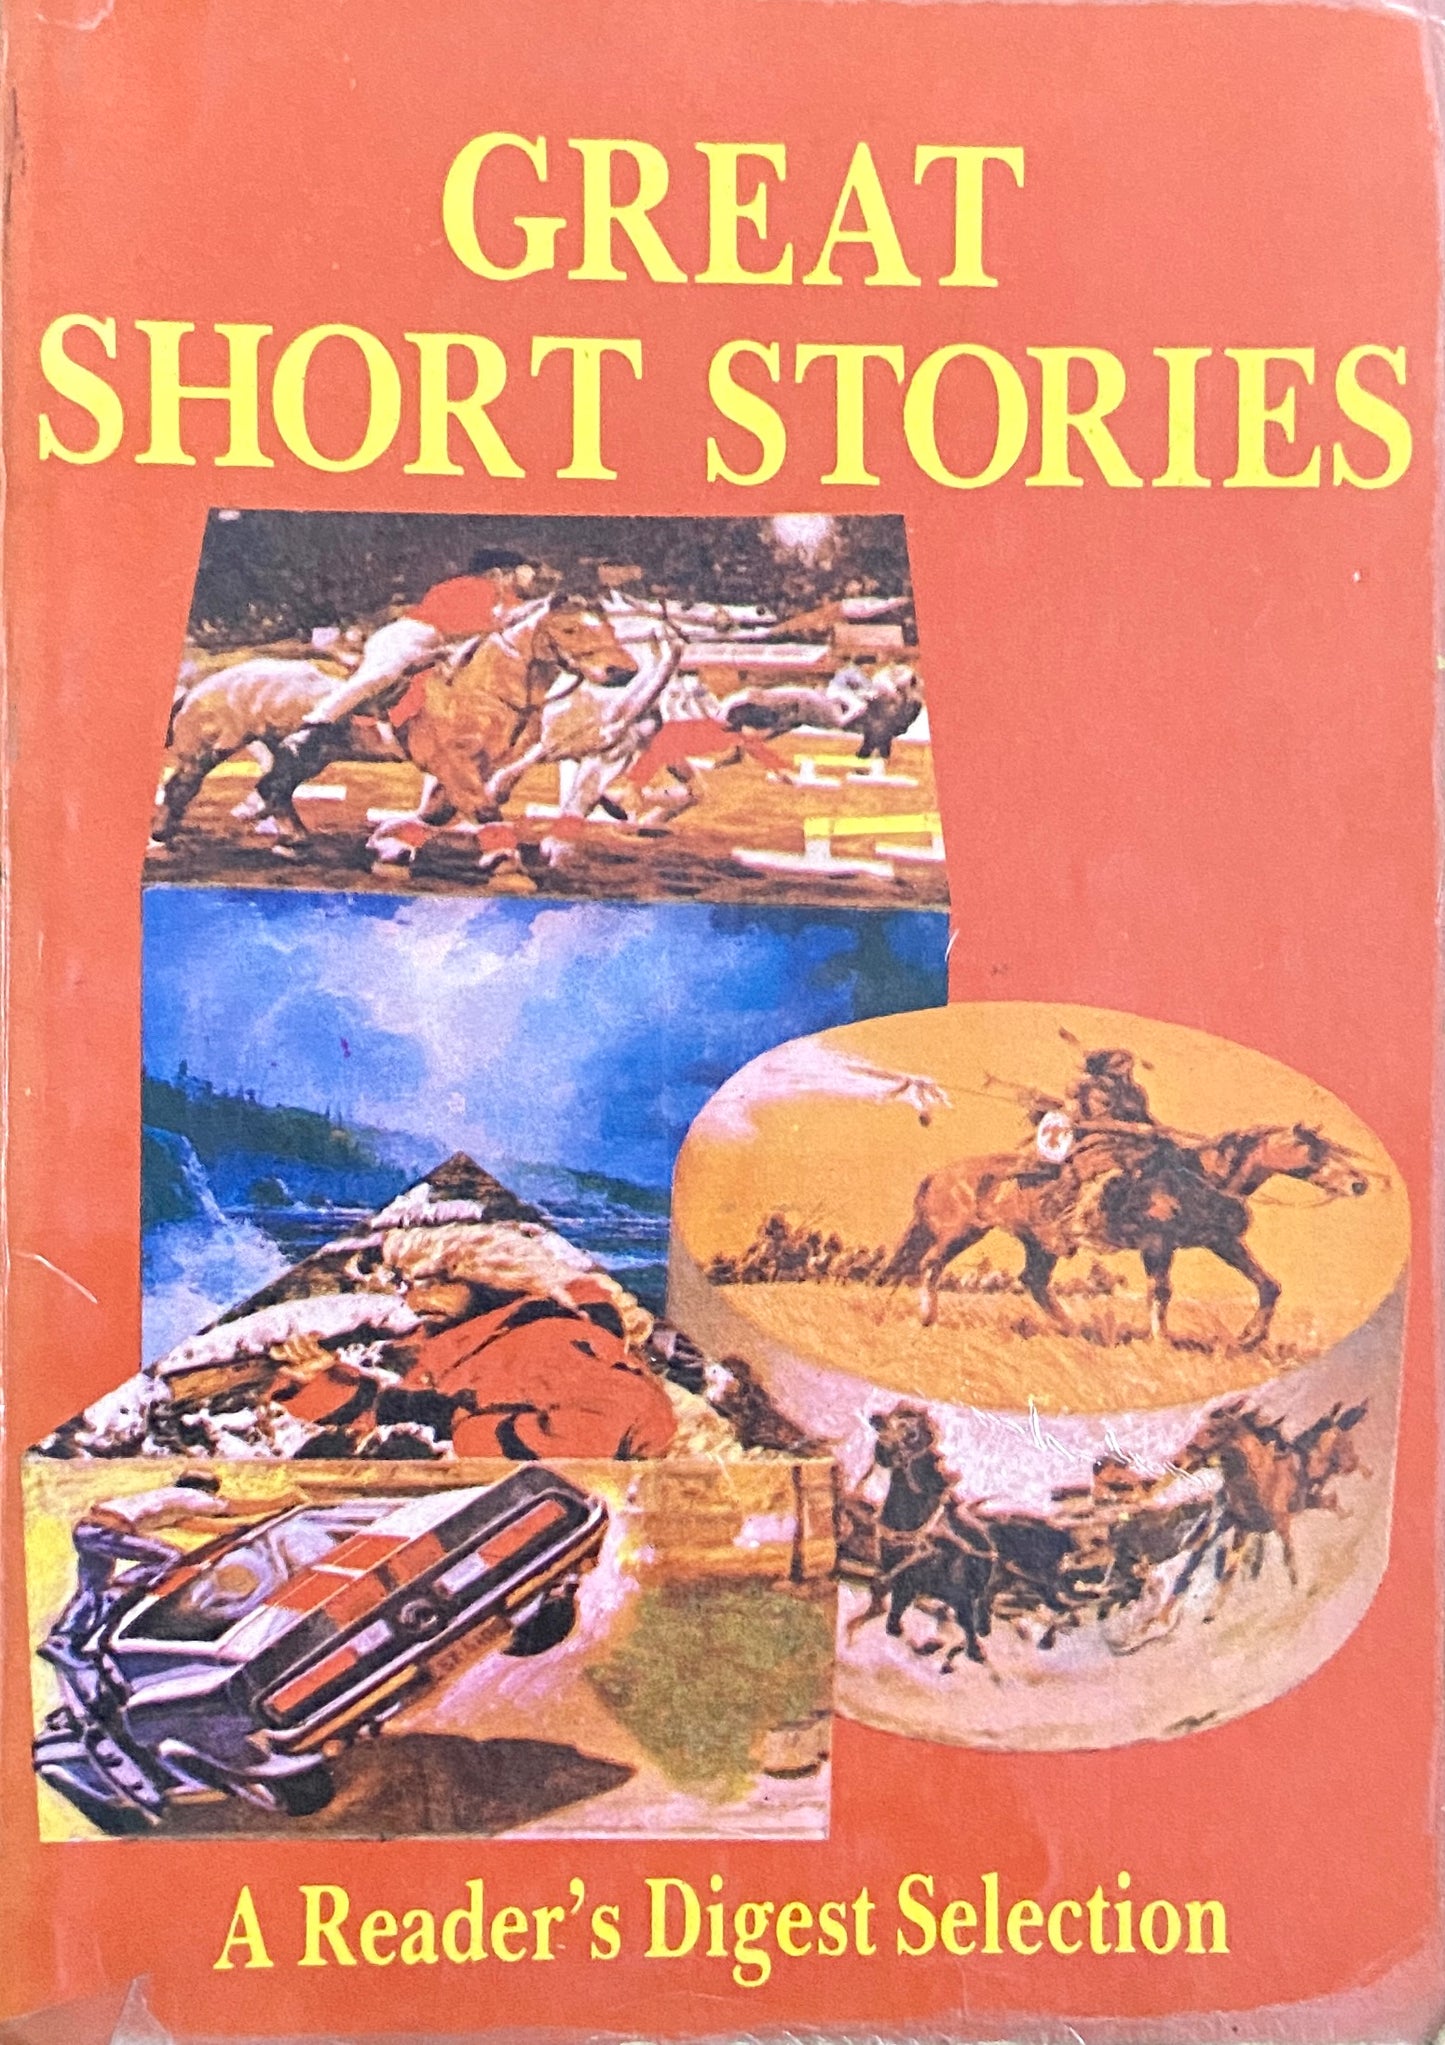 Great Short Stories by Readers Digest  Inspire Bookspace Books inspire-bookspace.myshopify.com Half Price Books India